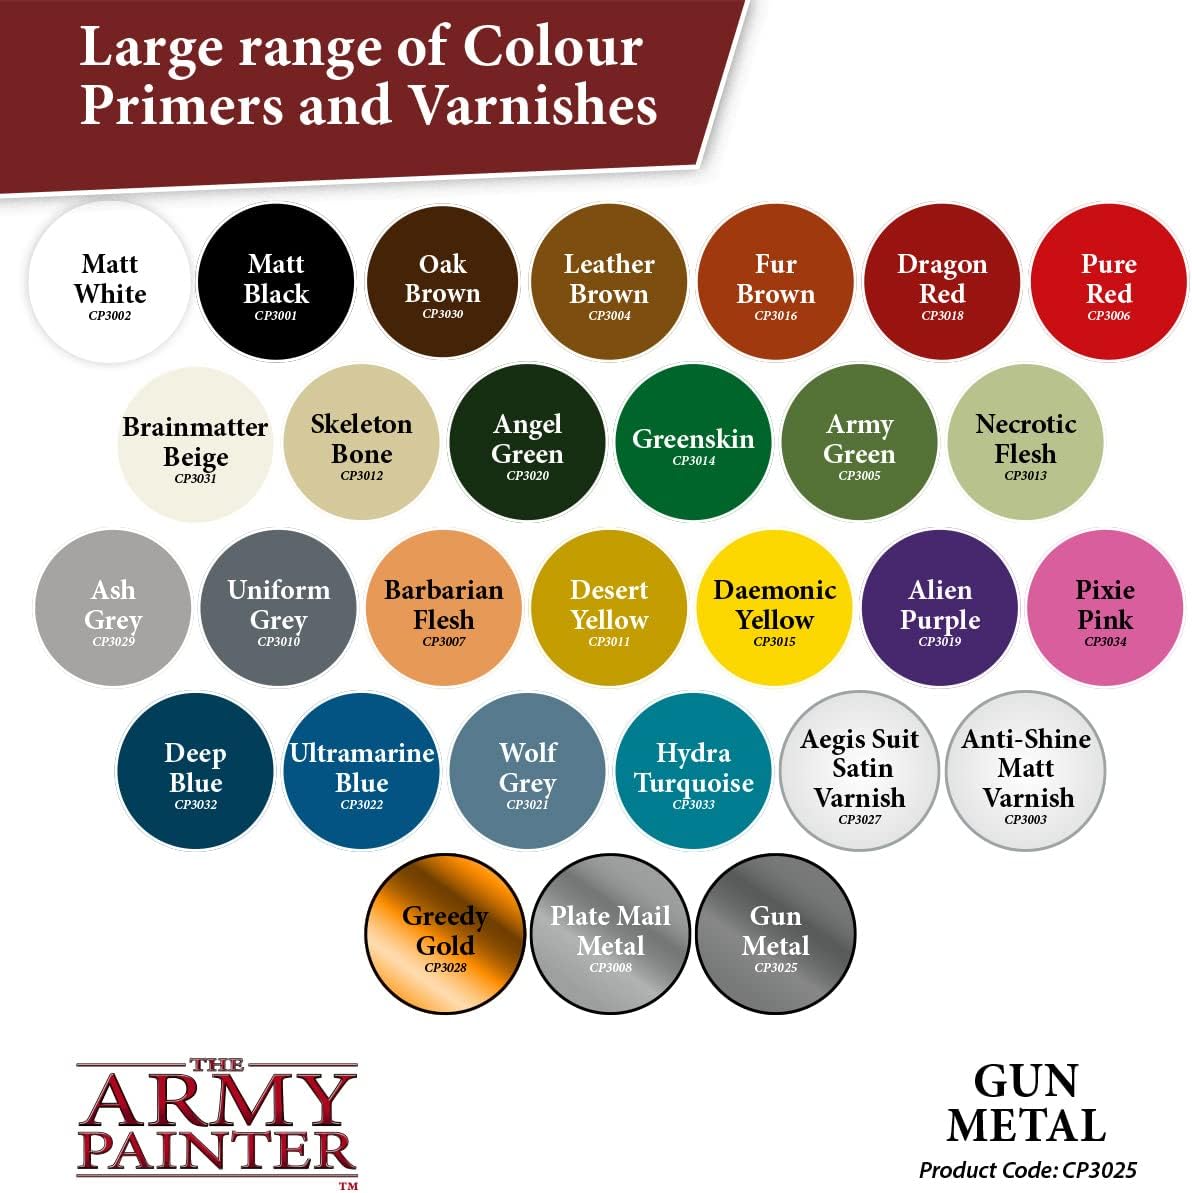 The Army Painter Color Primer Spray Paint, Plate Mail Metal, 400ml, 13.5oz - Acrylic Spray Undercoat for Miniature Painting - Spray Primer for Plastic Miniatures